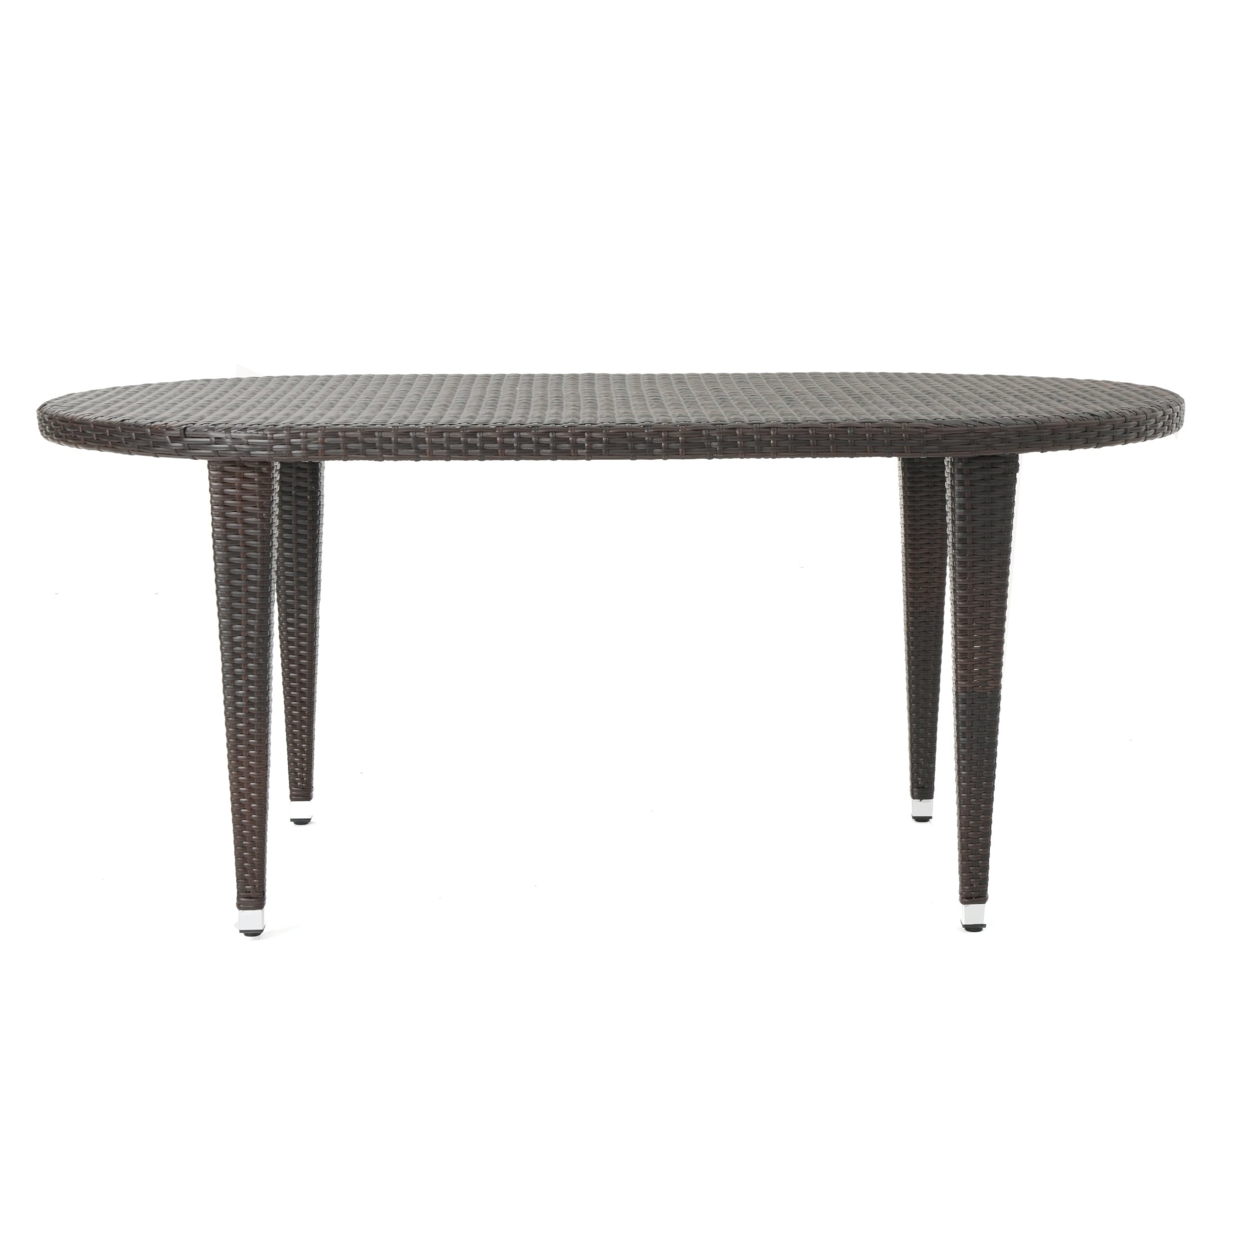 Domo Outdoor 69 Inch Wicker Oval Dining Table - Multi-brown